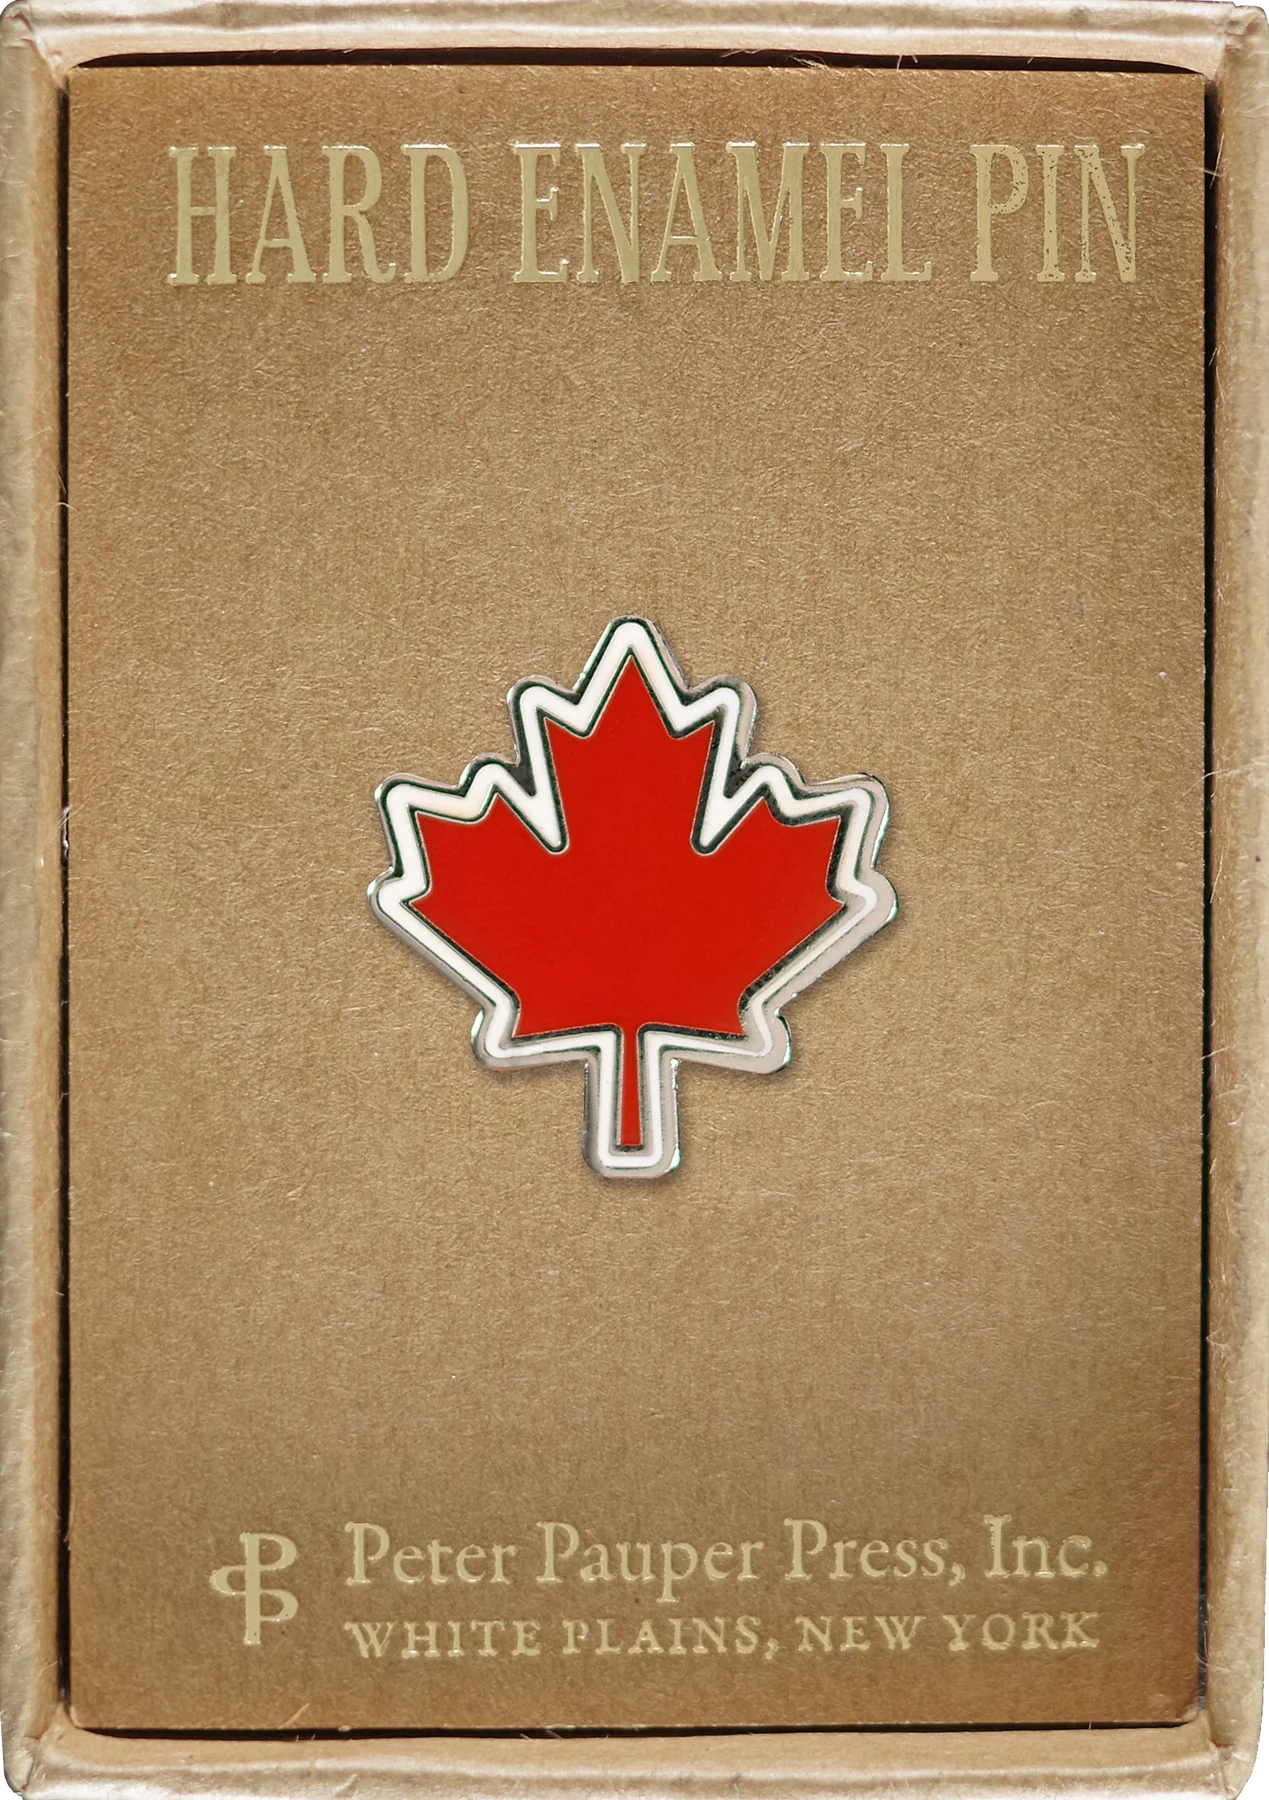 red maple leaf pin with a white outline attached to a box that reads hard enamel pin